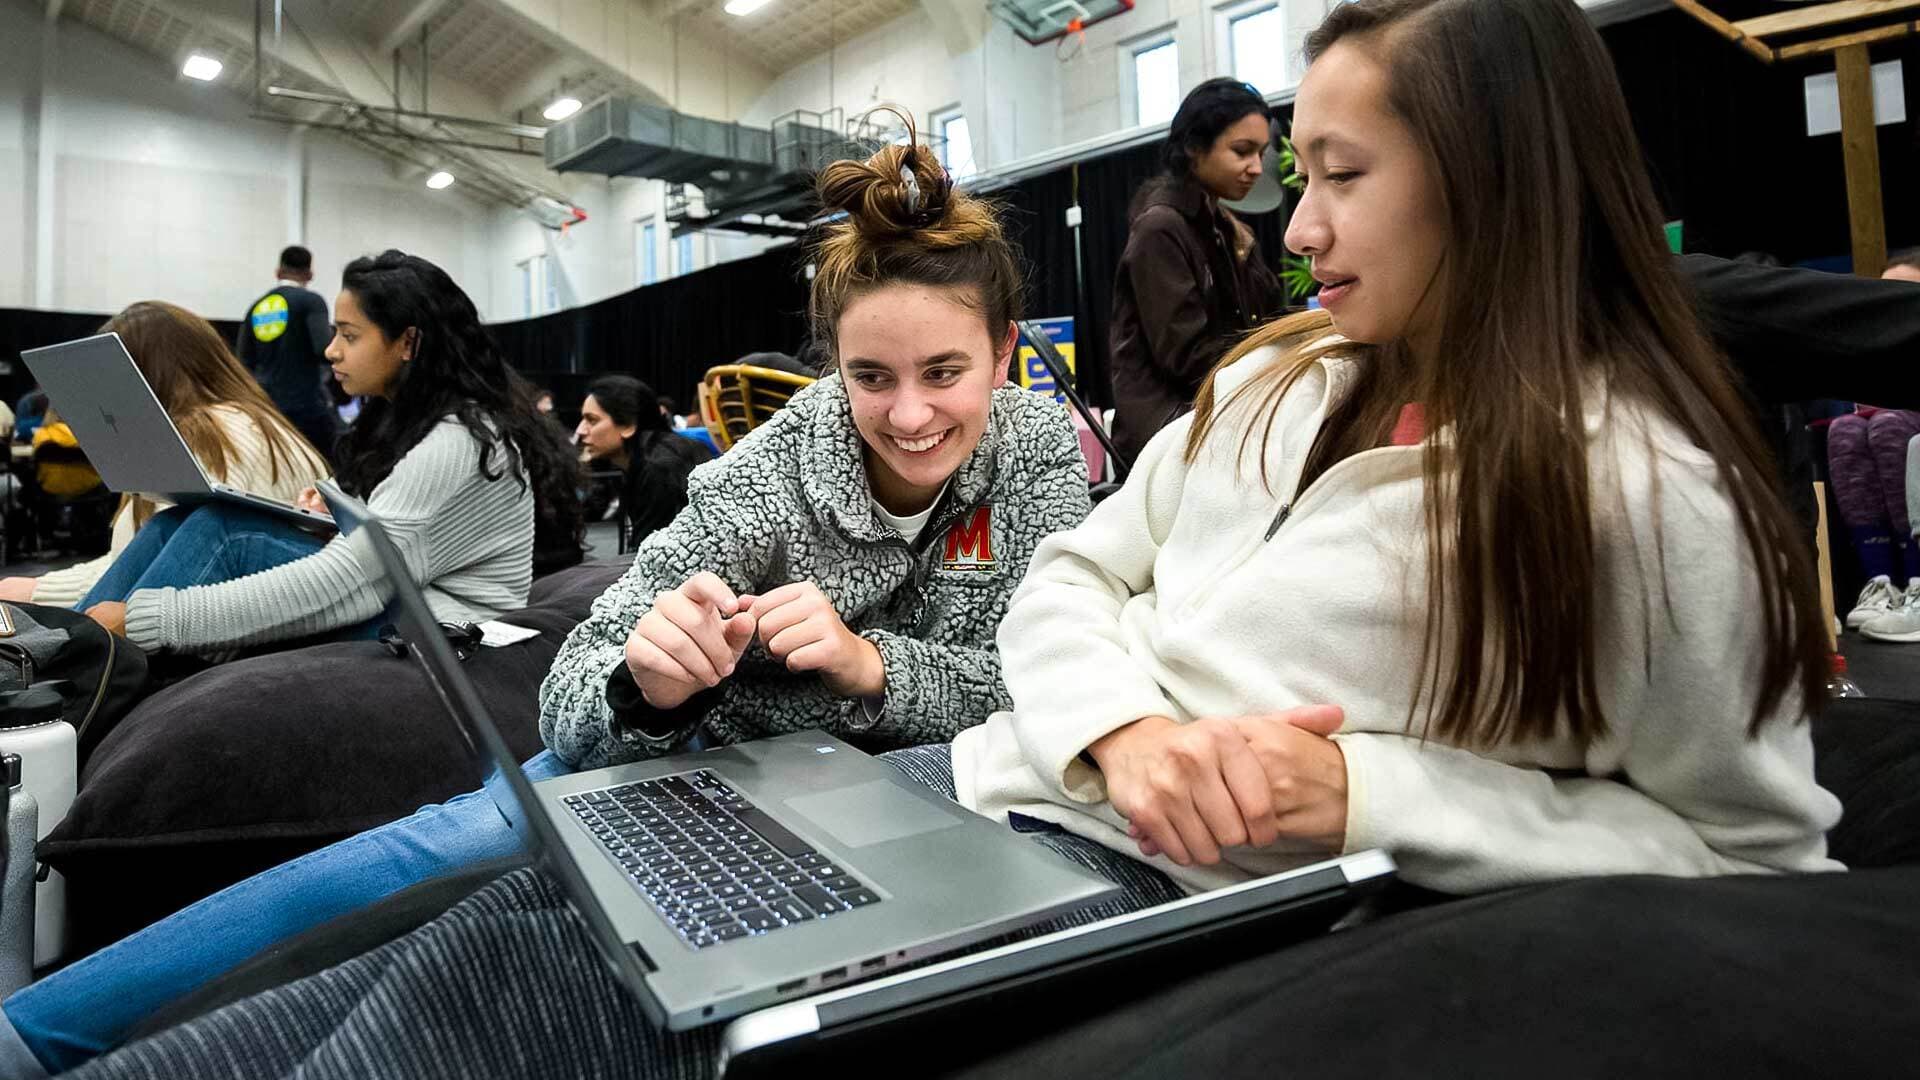 University of Maryland freshmen Sage Leone, left, of Elkton, Md., and Genevieve Sampson, right, of Severna Park, Md., take part in Technica on Saturday at the Armory.